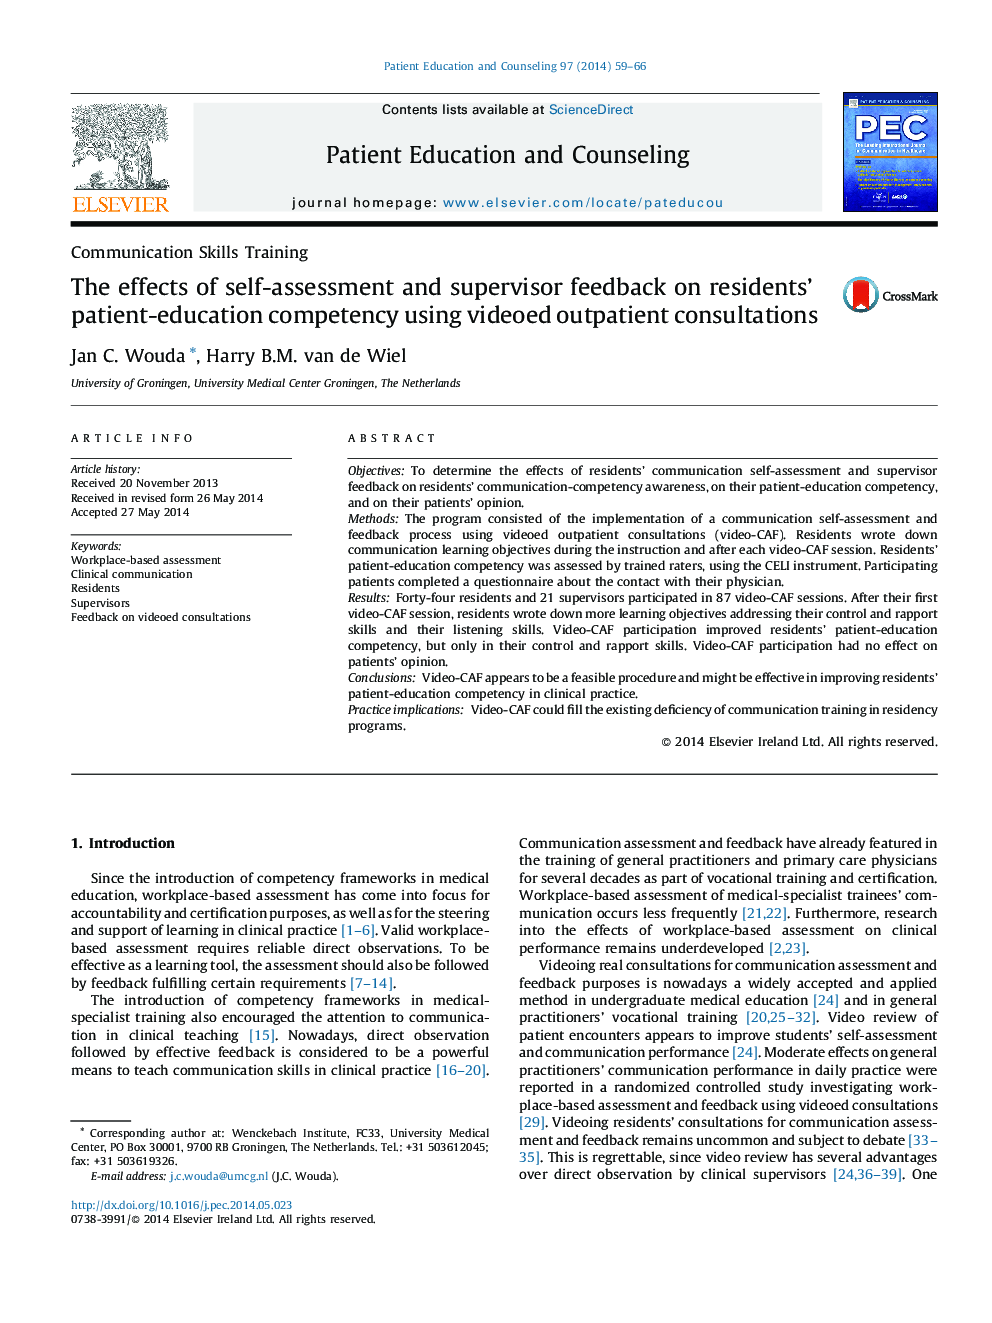 The effects of self-assessment and supervisor feedback on residents' patient-education competency using videoed outpatient consultations